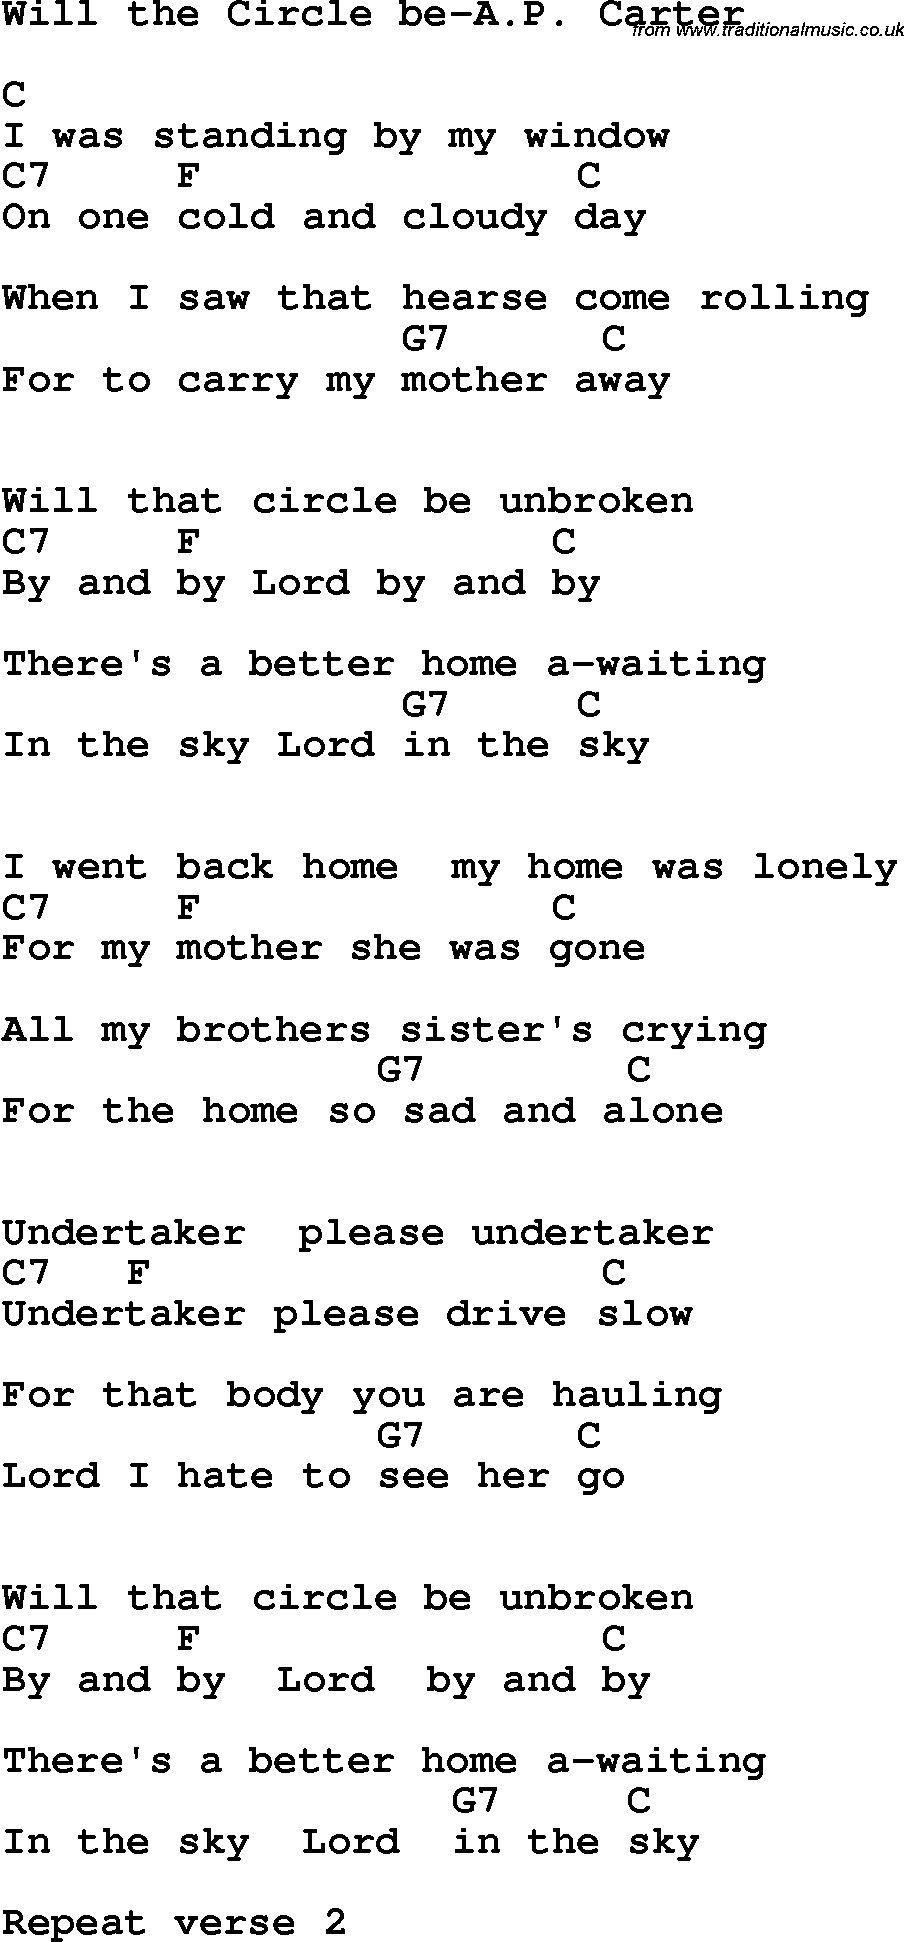 Country, Southern and Bluegrass Gospel Song Will the Circle be Unbroken-A P Carter lyrics and chords